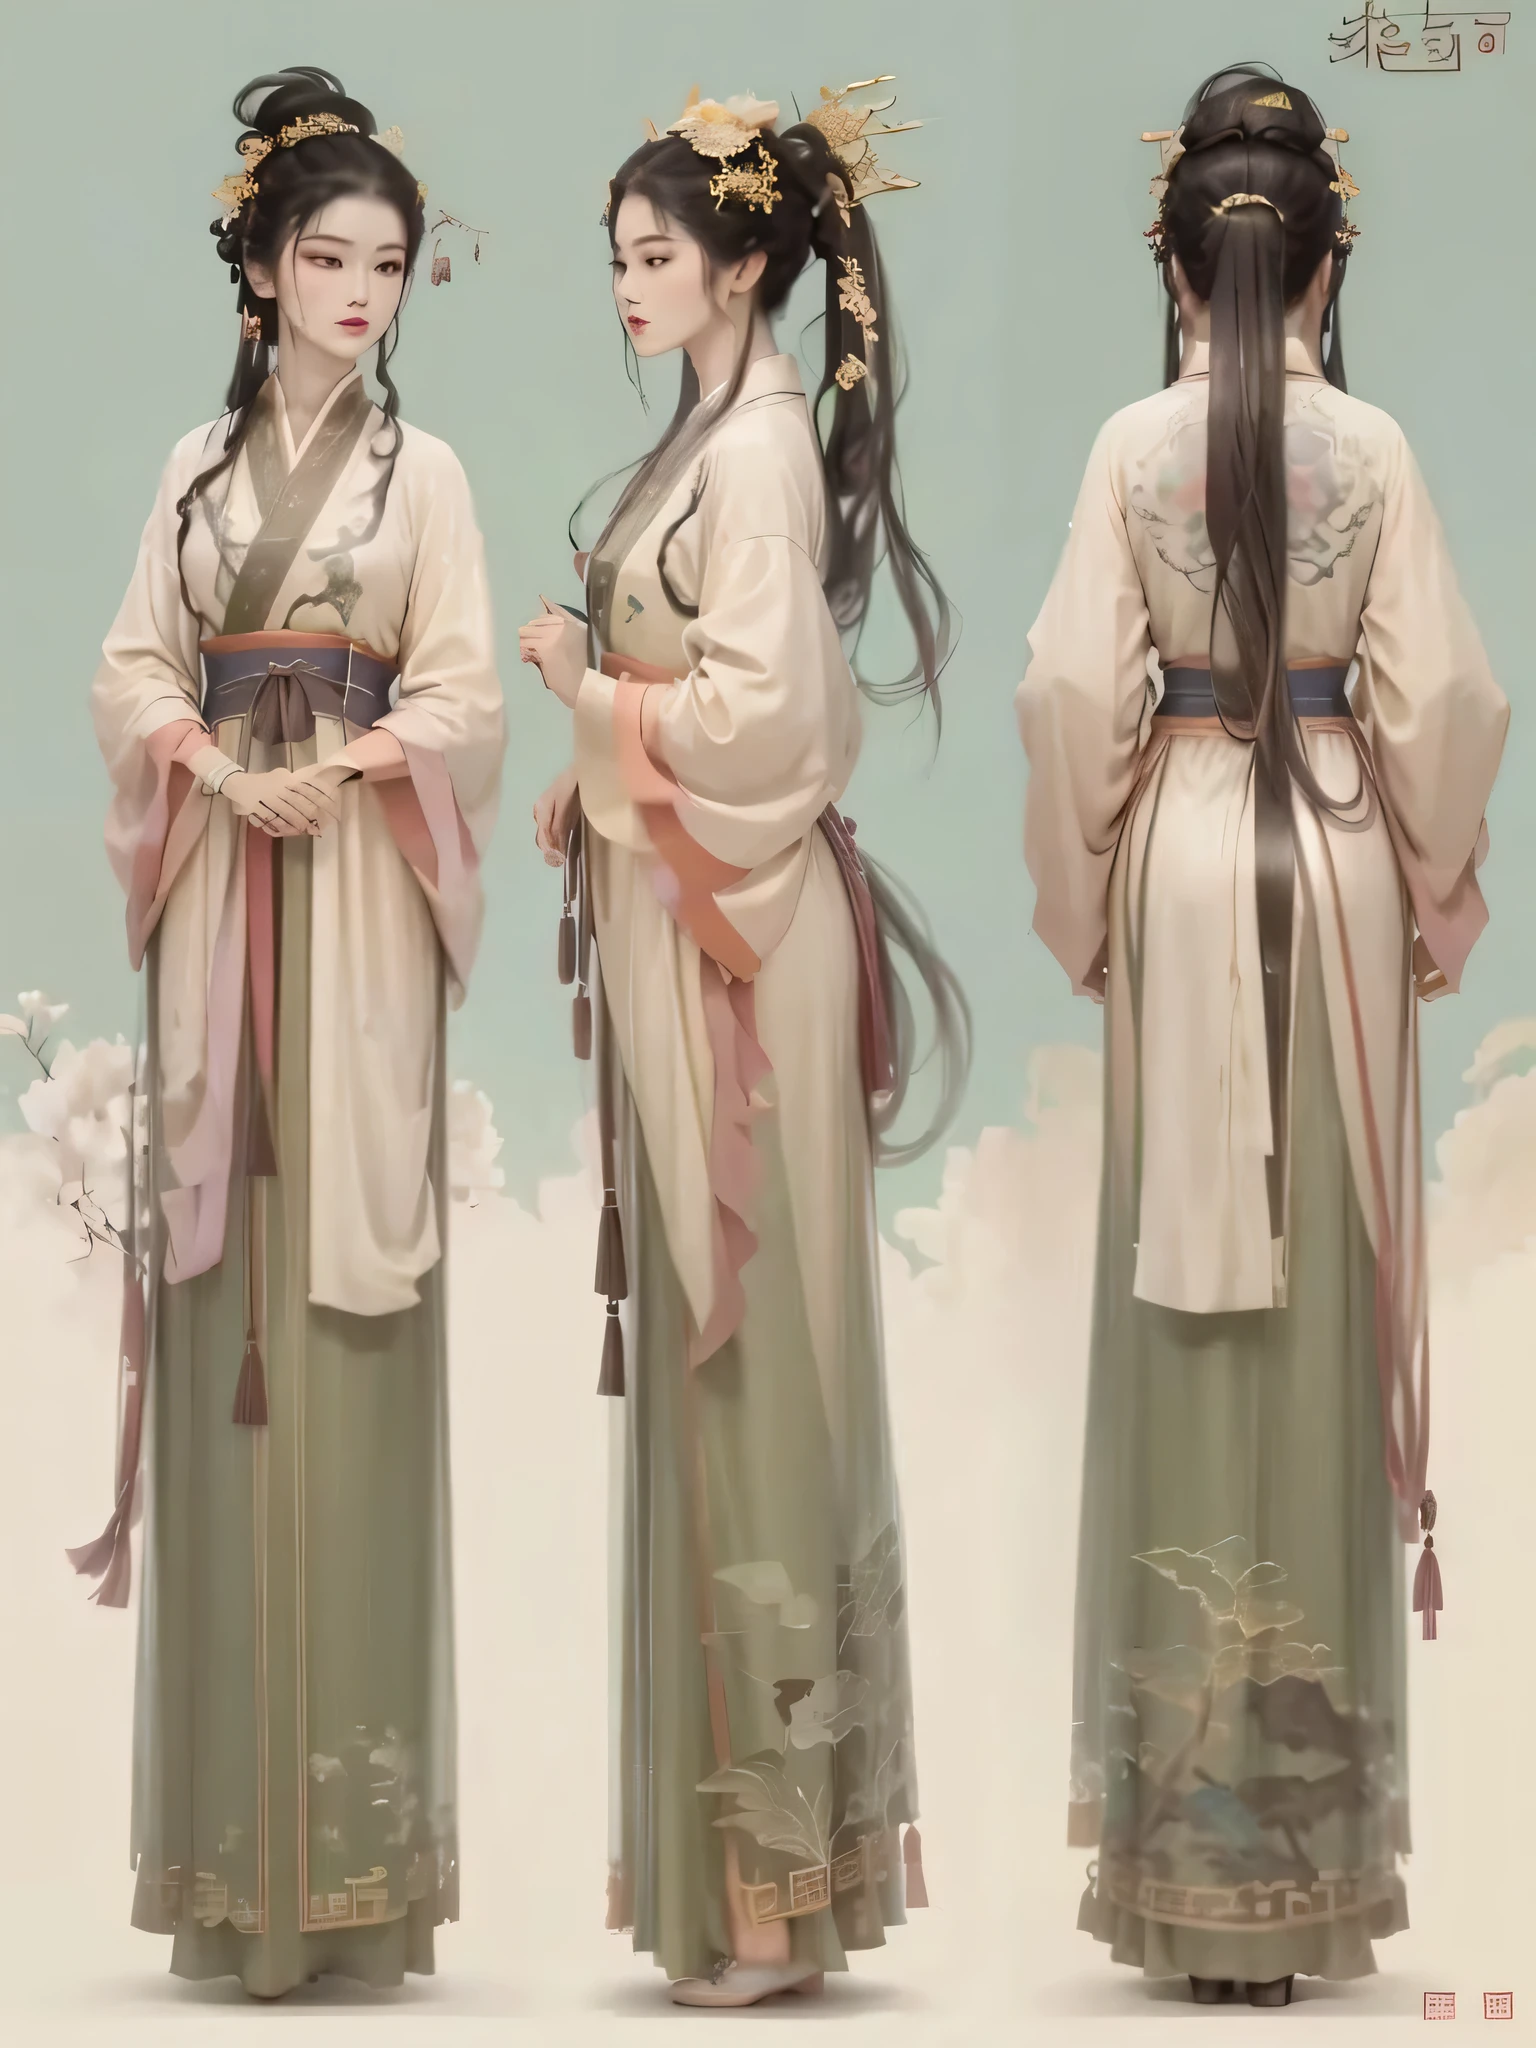 three women in Chinese traditional clothing standing in front of a sky, hanfu, Wearing ancient Chinese clothes, palace ， A girl in hanfu, flowing hair and gown, floating robe, white hanfu, Chinese traditional clothing, Inspired by Qiu Ying, chinese princess, flowing magic robe, wearing floating robe, Exquisite renderings of the Tang Dynasty